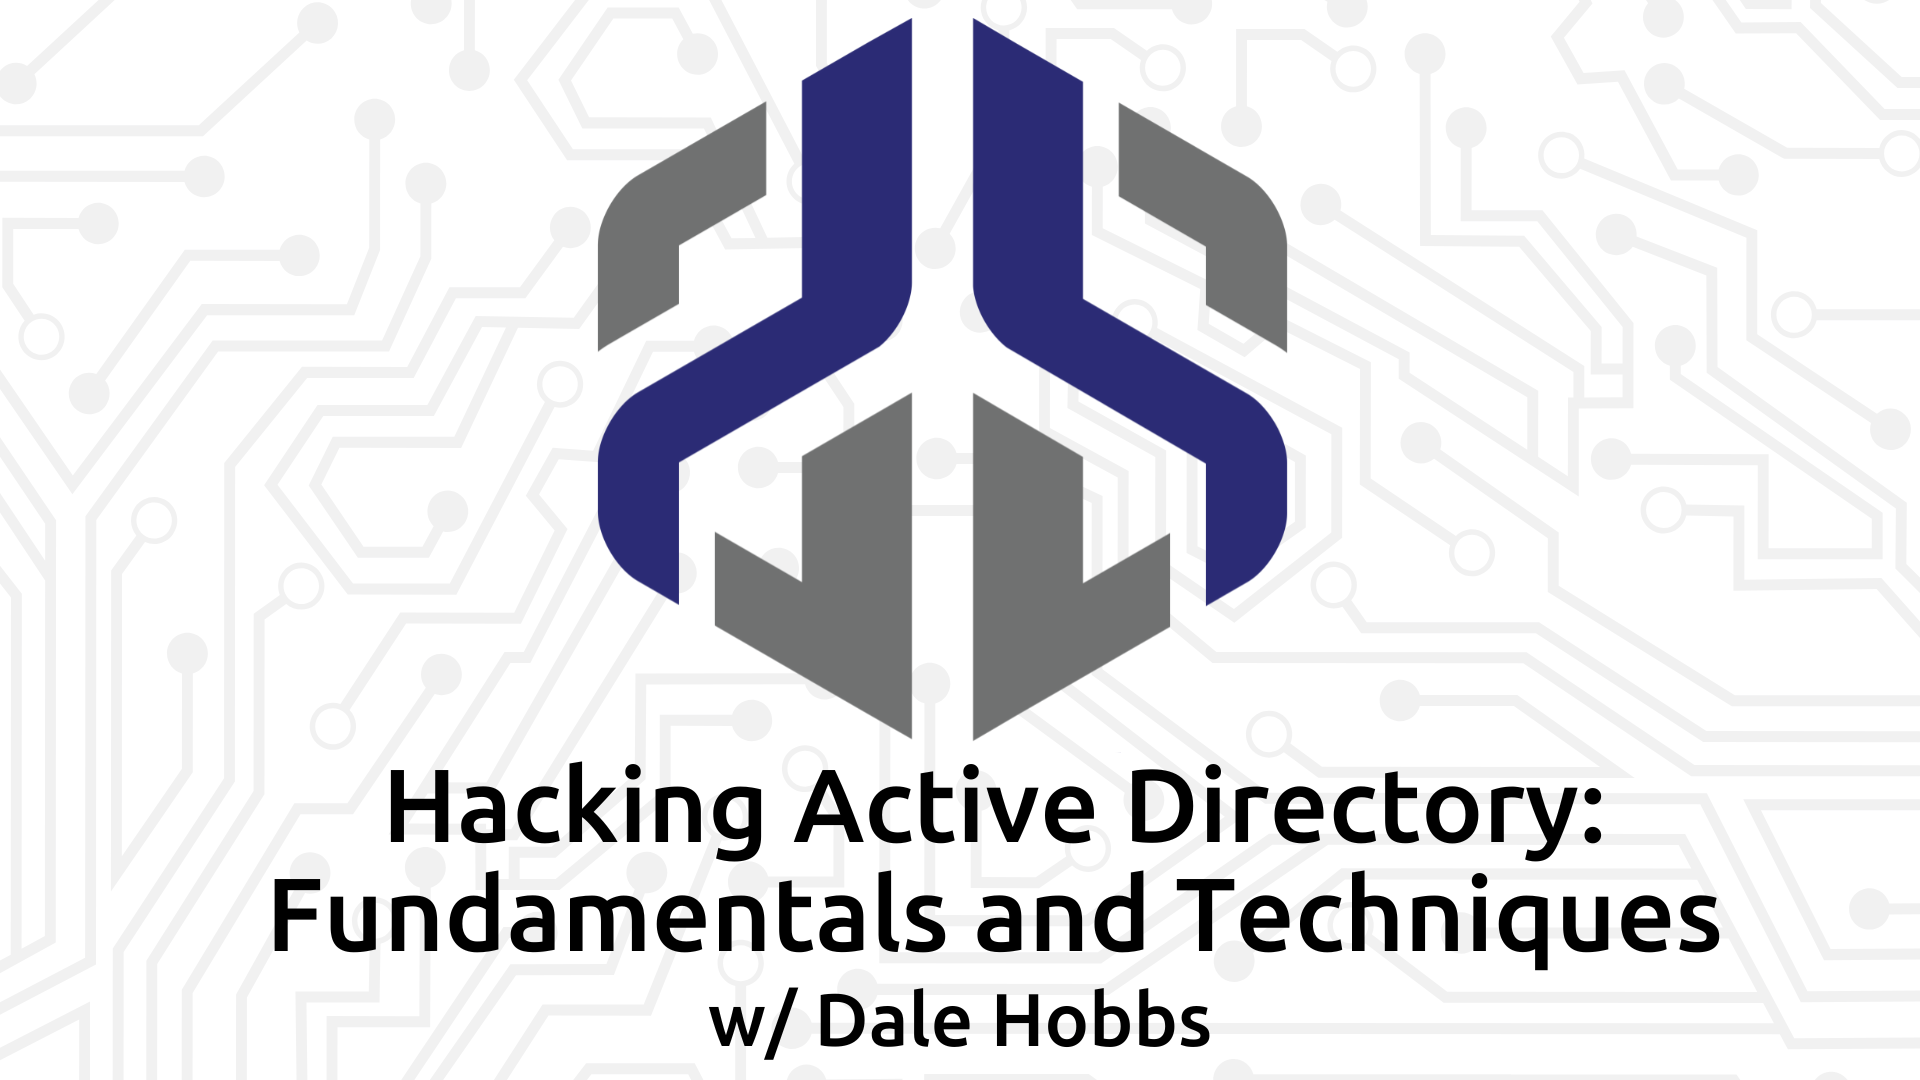 Hacking Active Directory: Fundamentals and Techniques w/ Dale Hobbs